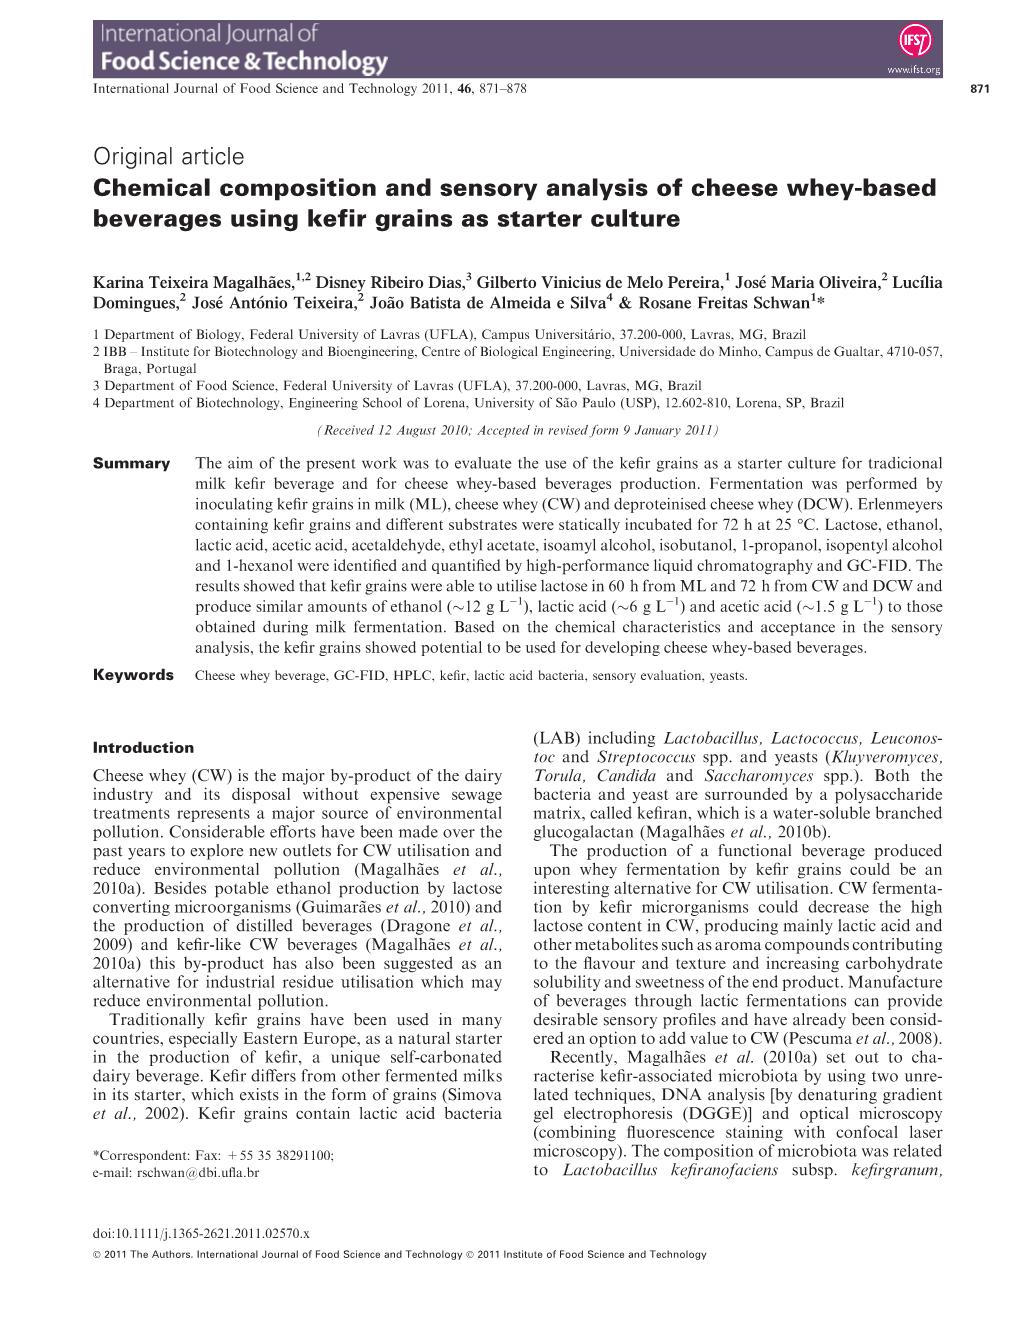 Chemical Composition and Sensory Analysis of Cheese Wheybased Beverages Using Kefir Grains As Starter Culture